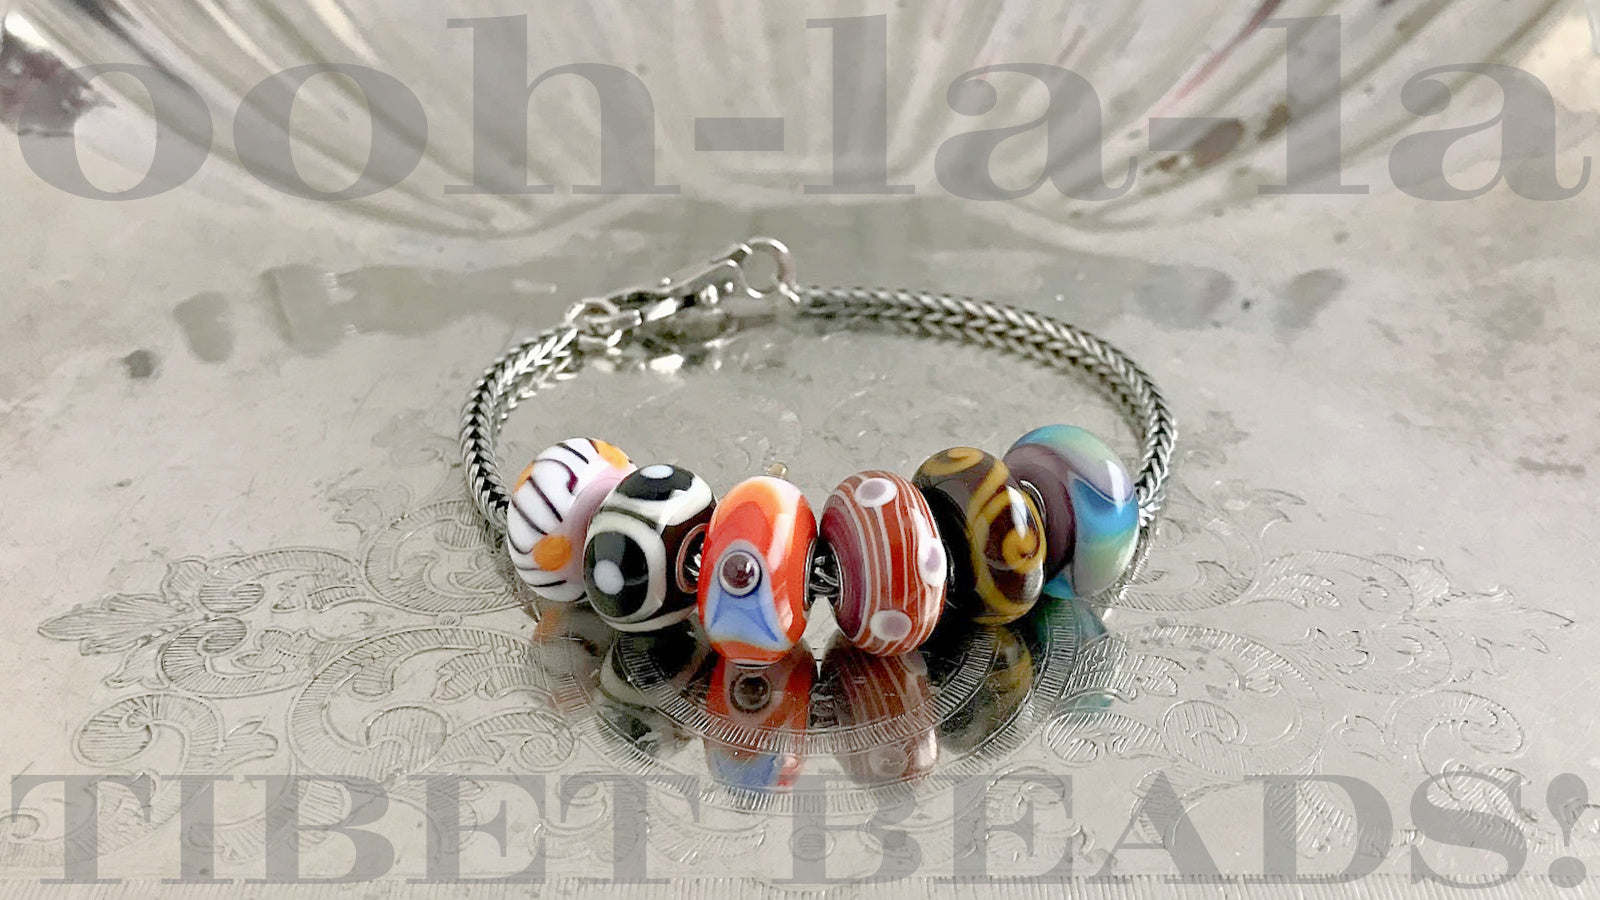 TWO complete sets of six “TIBET BEADS” Trollbeads will be available at Suzie Q Studio.